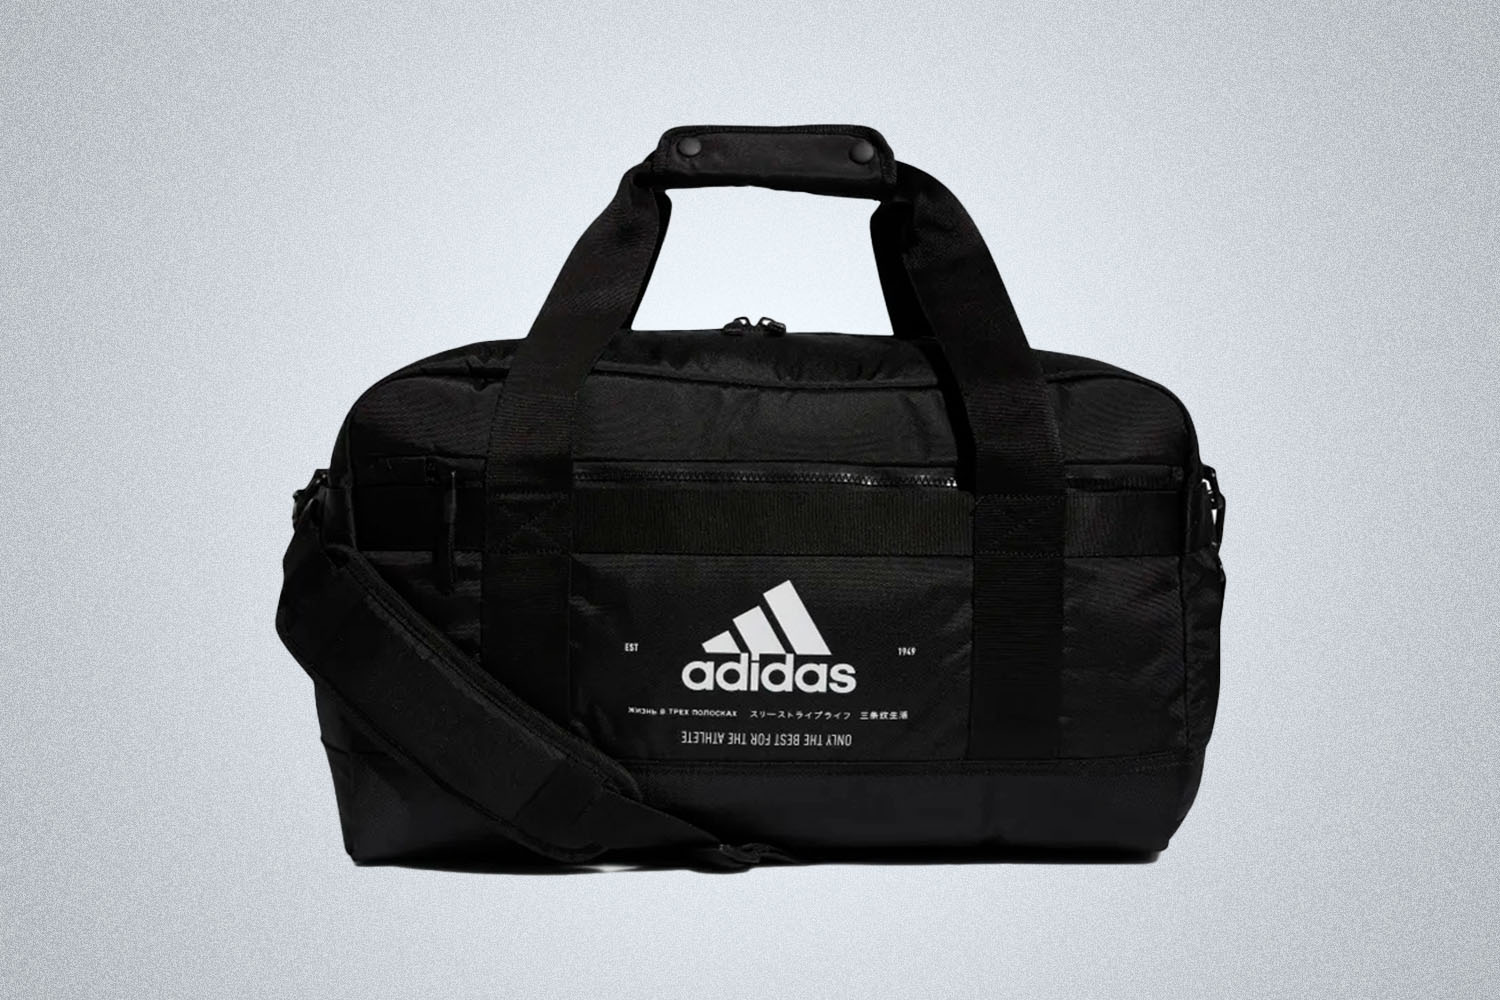 a black duffle bag from Adidas on a grey background